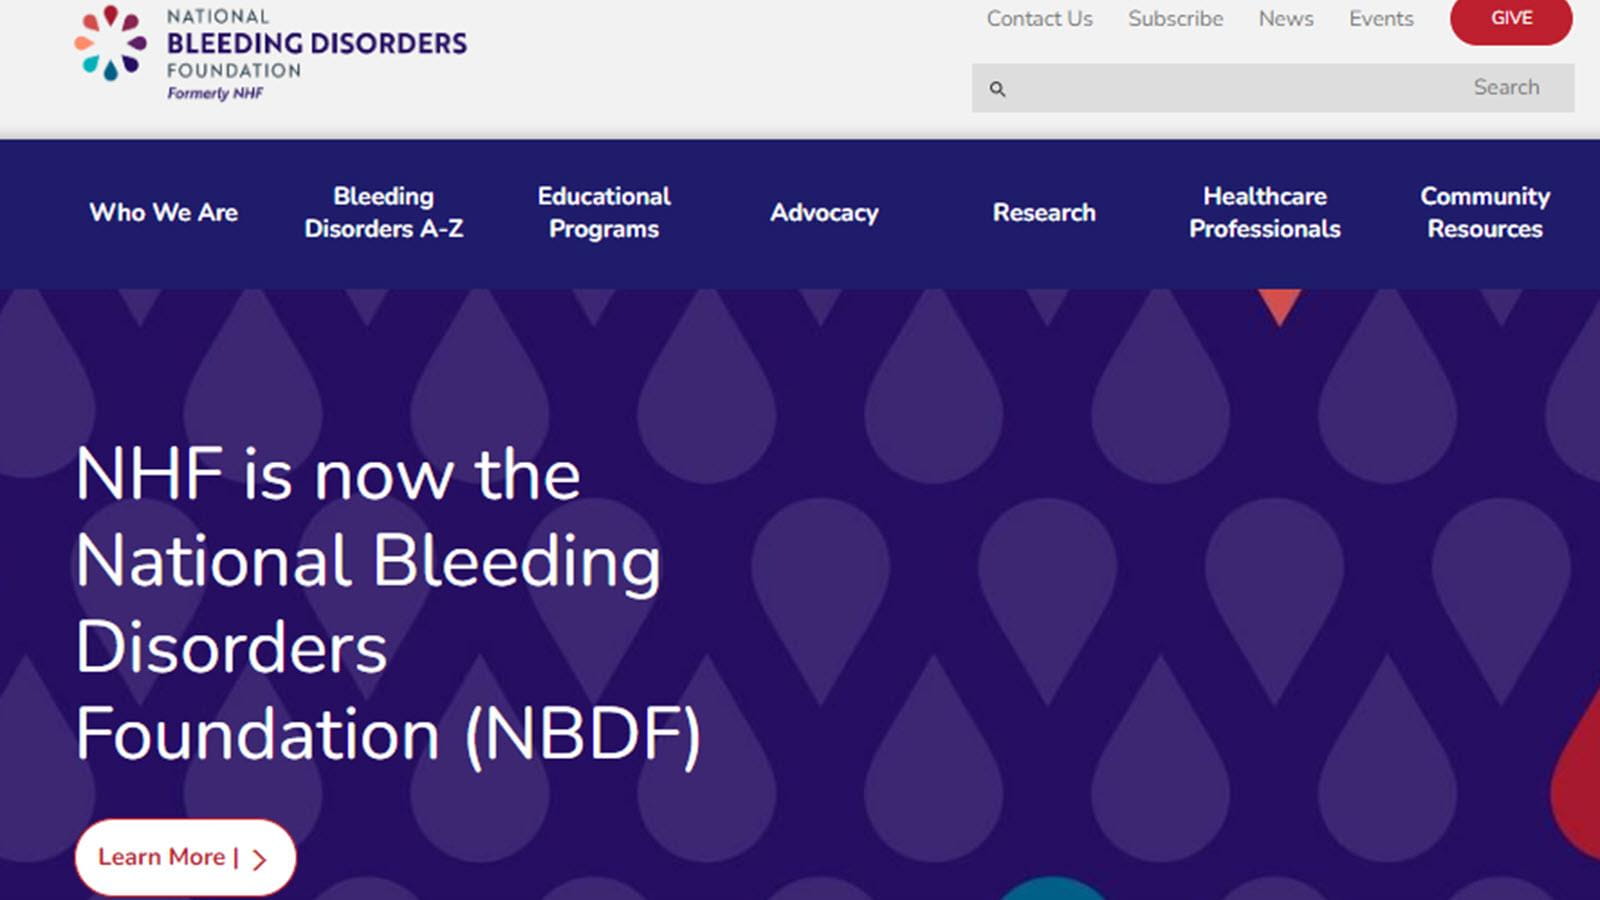 NHF is now the National Bleeding Disorders Foundation